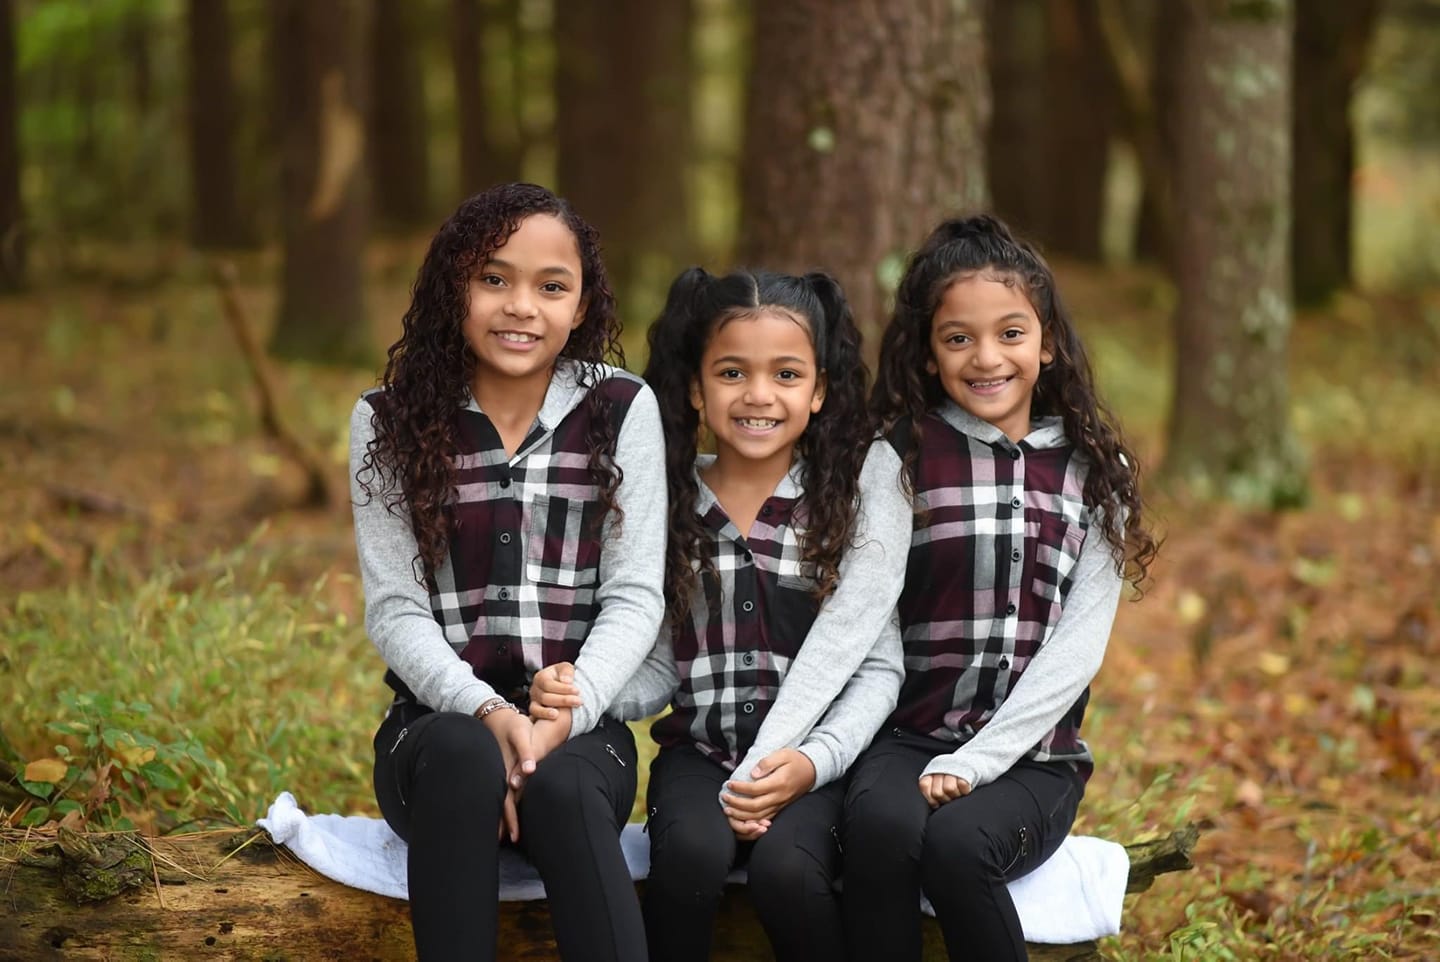 Stavons daughters from left to right: Skye, Saige and Serenity